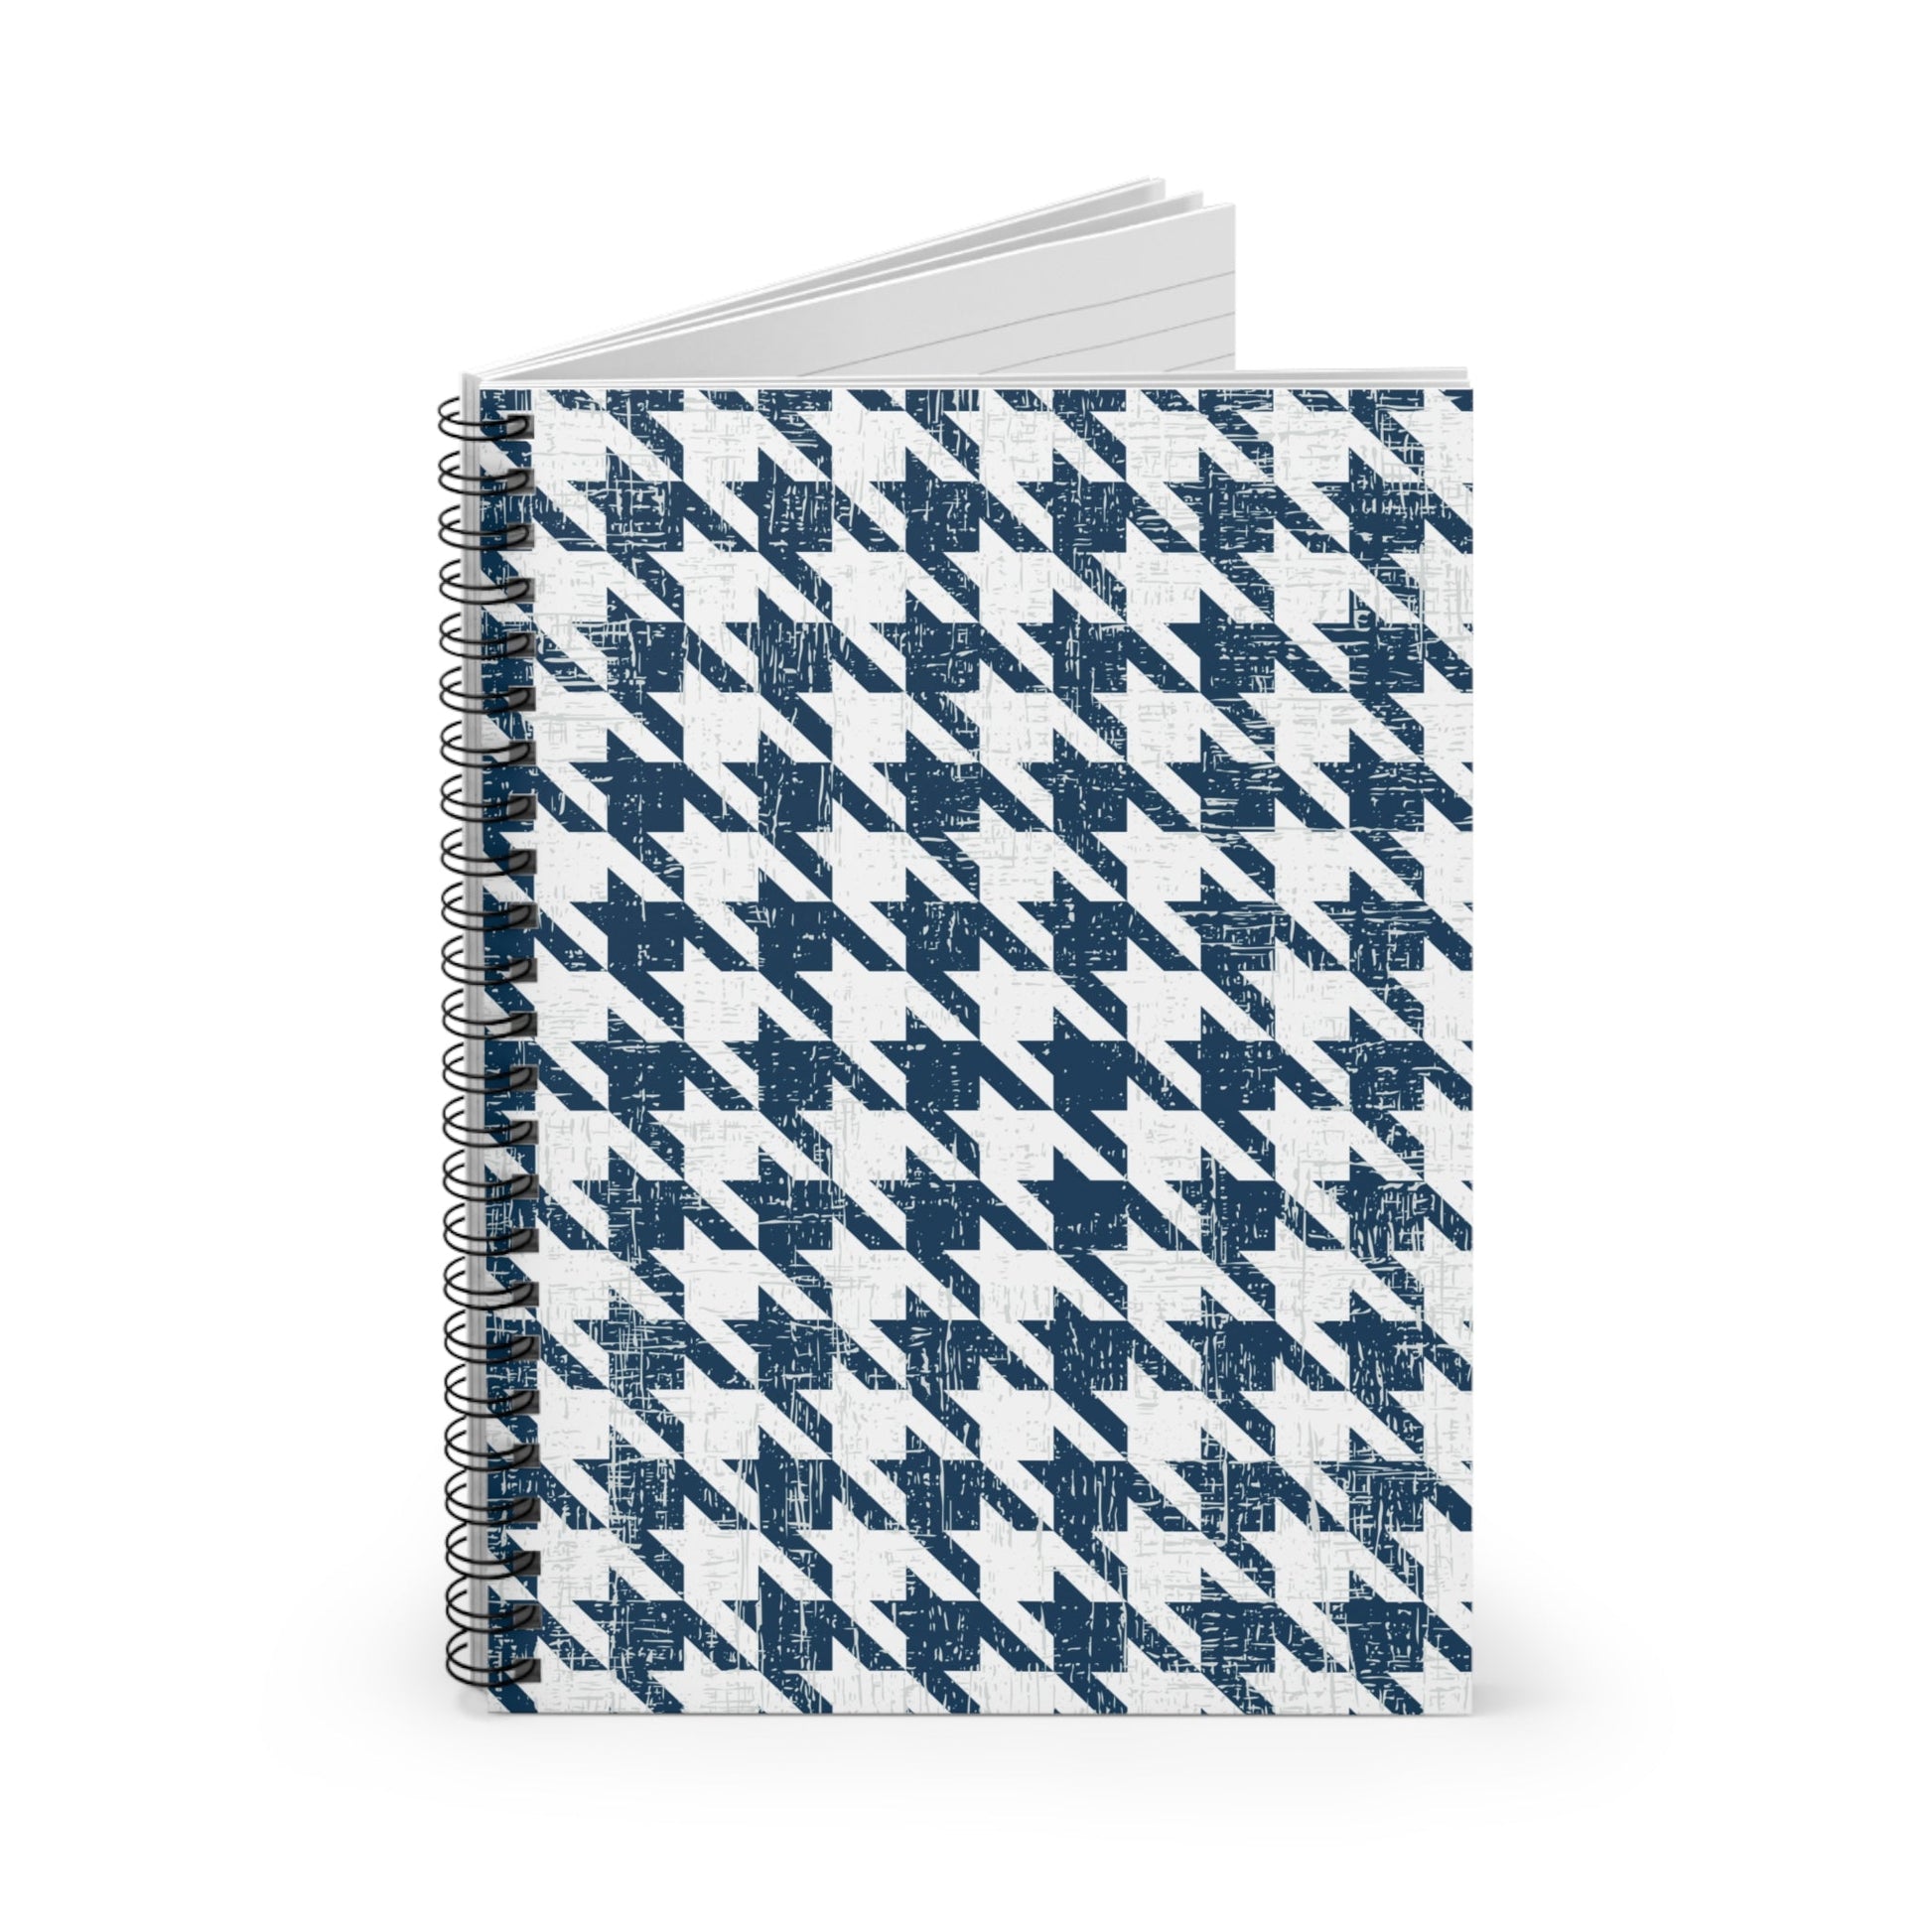 Blue and White Houndstooth Pattern Spiral Notebook - Ruled Line: Classic Chic Design - Eddy and Rita